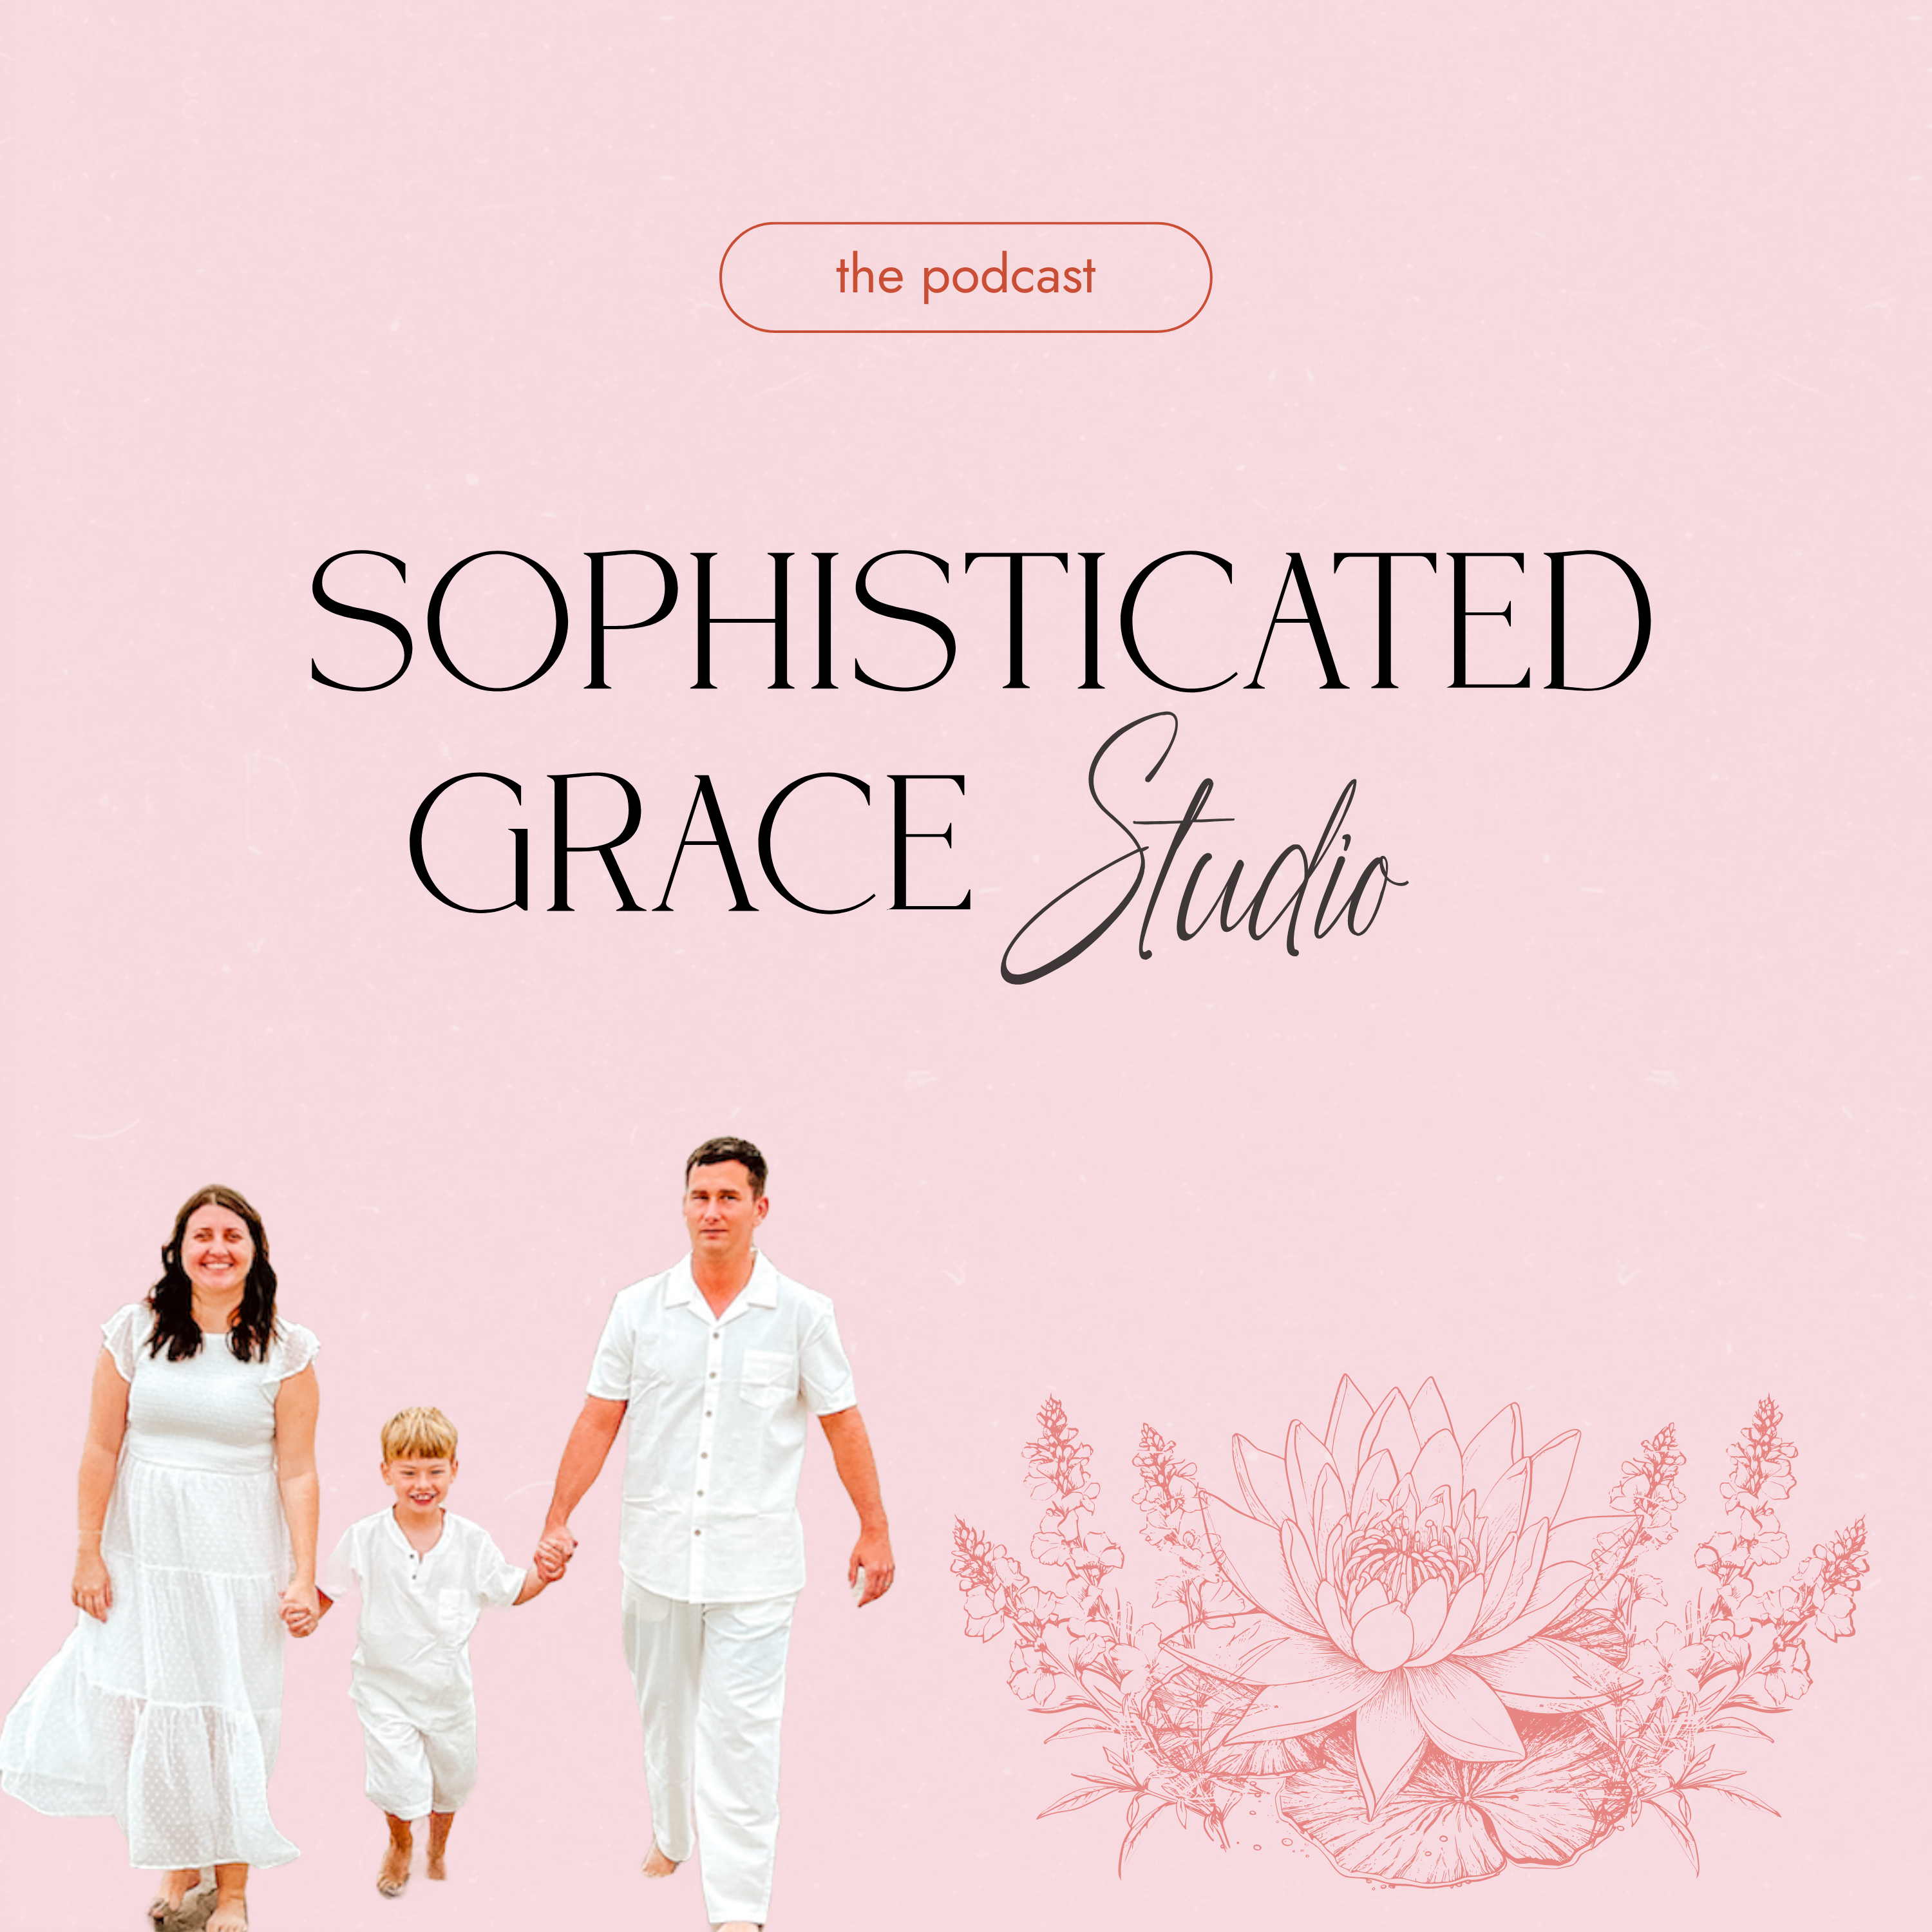 Sophisticated Grace Studio Podcast Cover